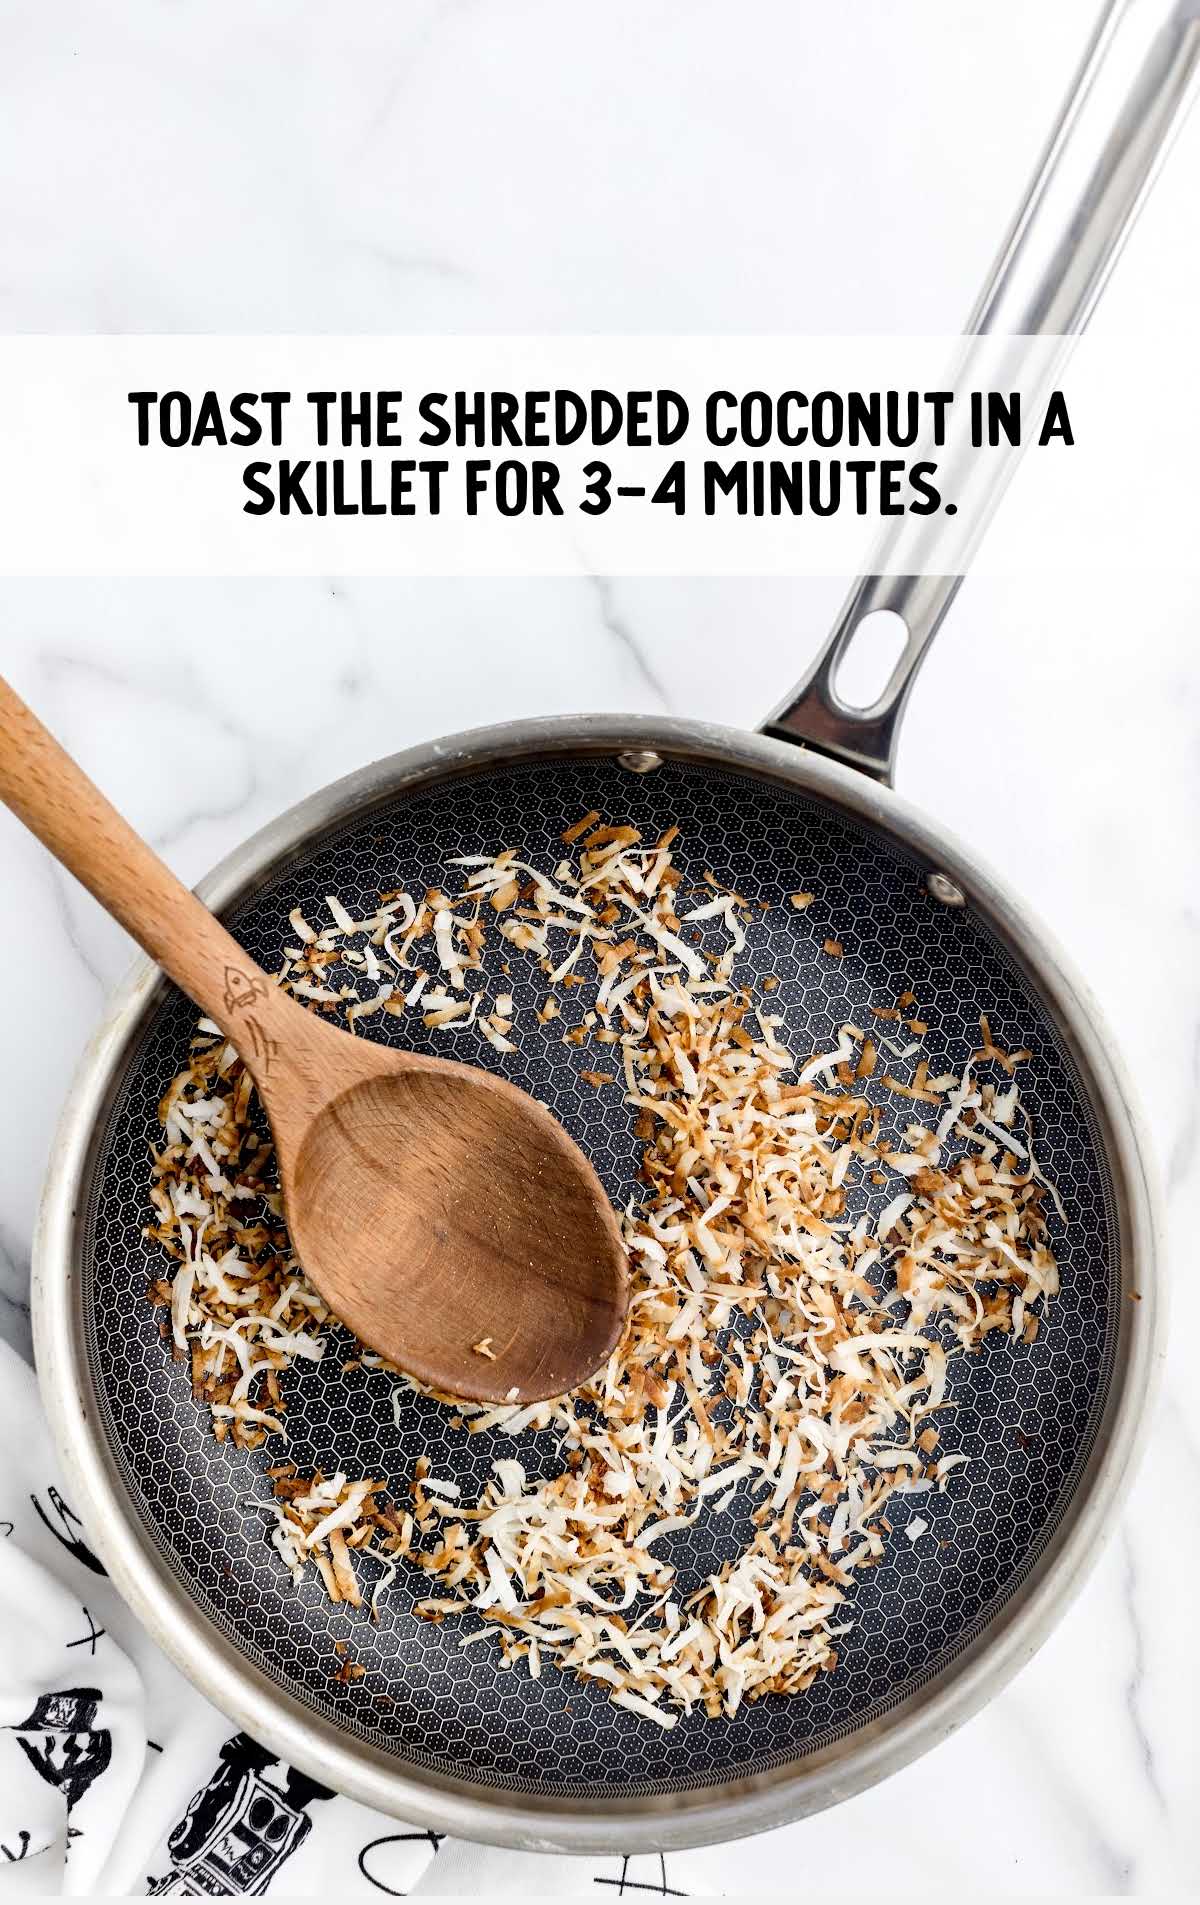 shredded coconut placed on a skillet